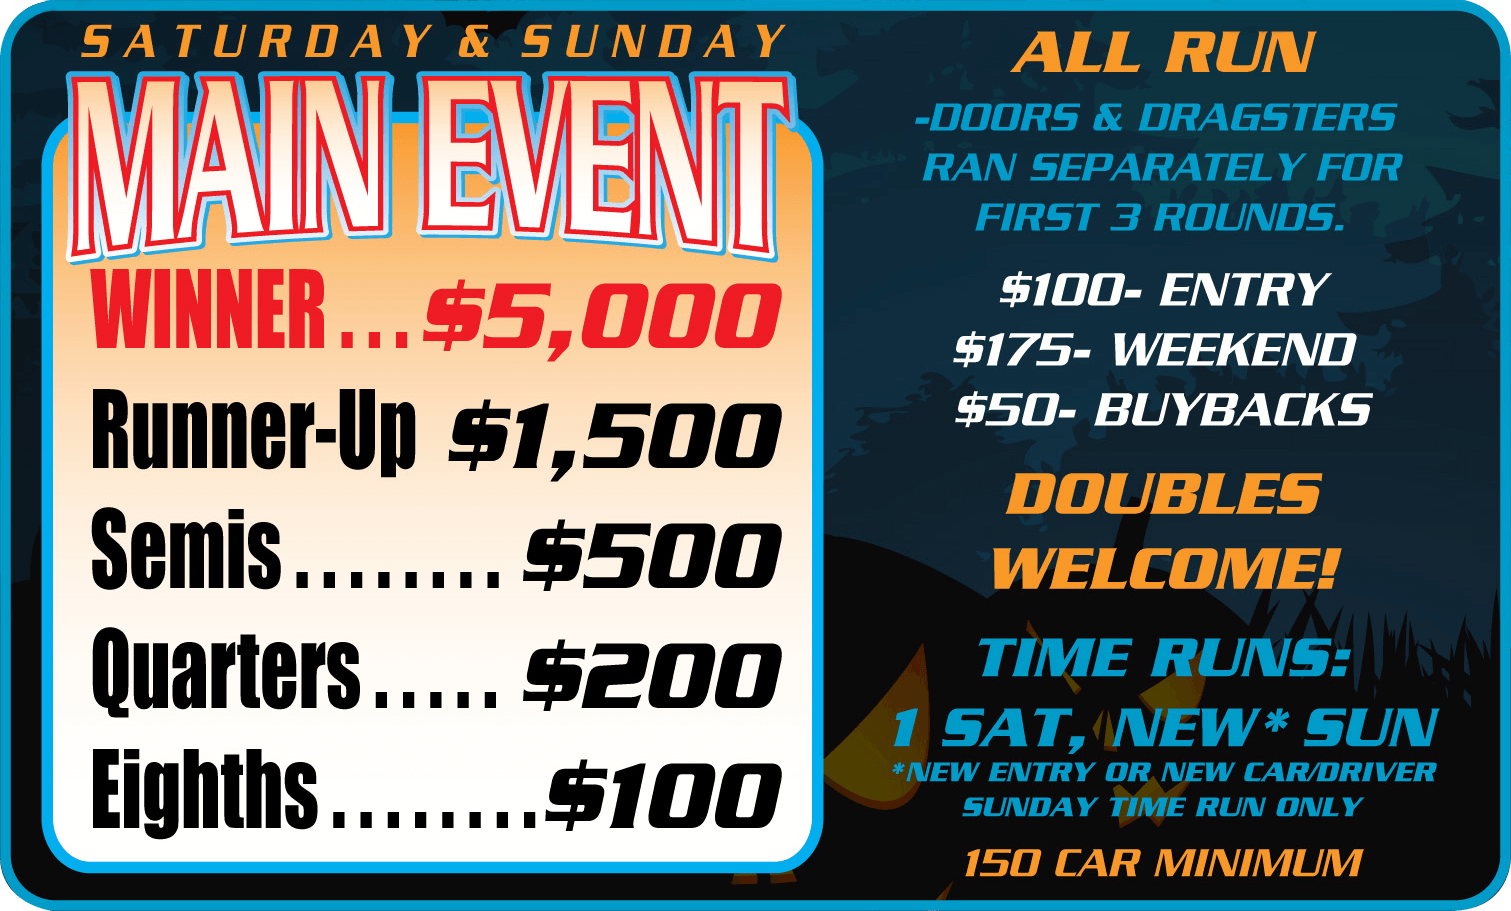 Main Event: $100 entry, $175 full weekend. Top prize $5,000